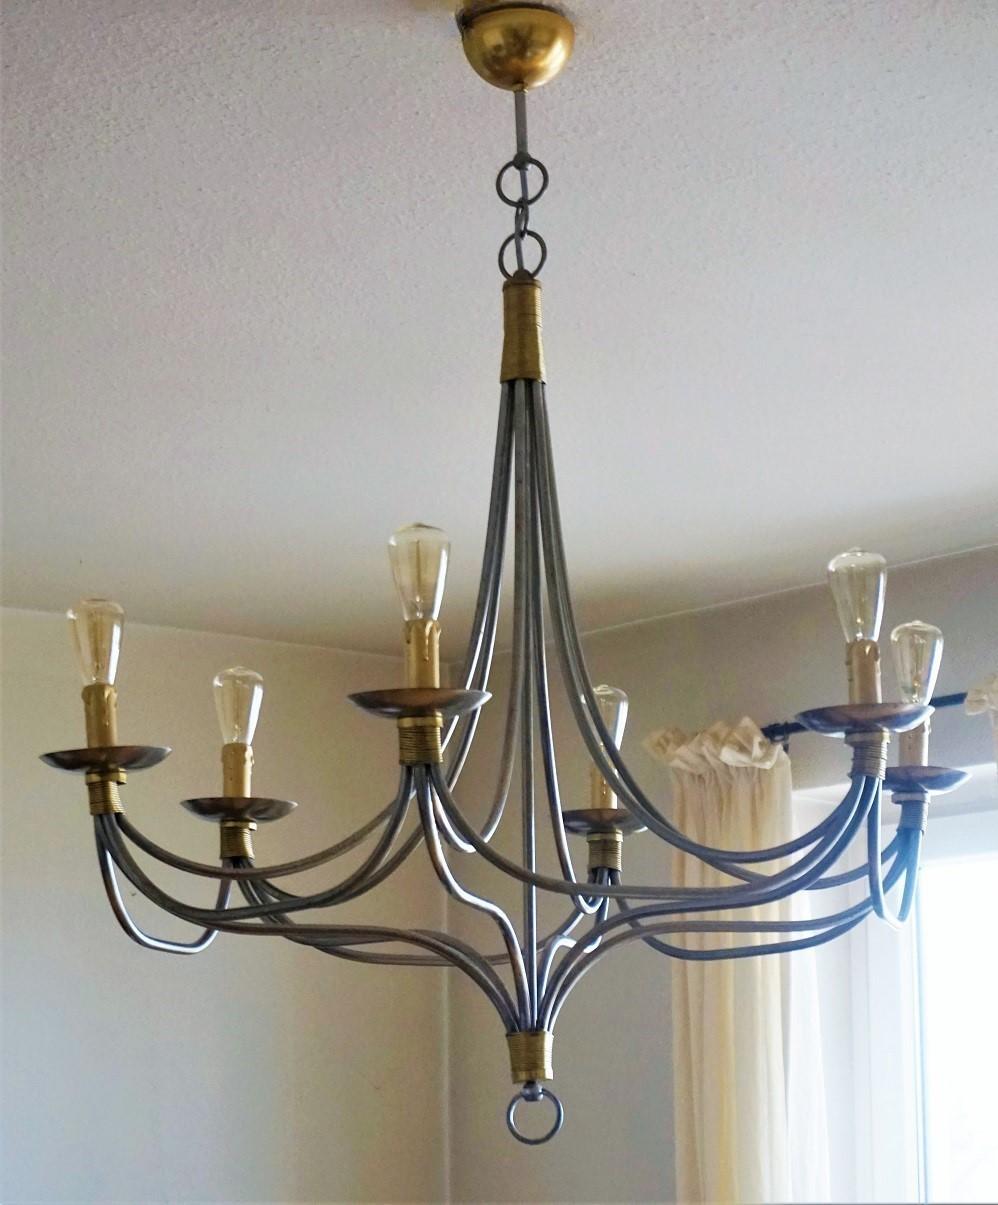 A large Mid-Century Modern brushed chrome and brass six-light chandelier, Italy 1960s.
Six Edison E14 light candelabra bulb sockets.
Measures:
Overall height 39